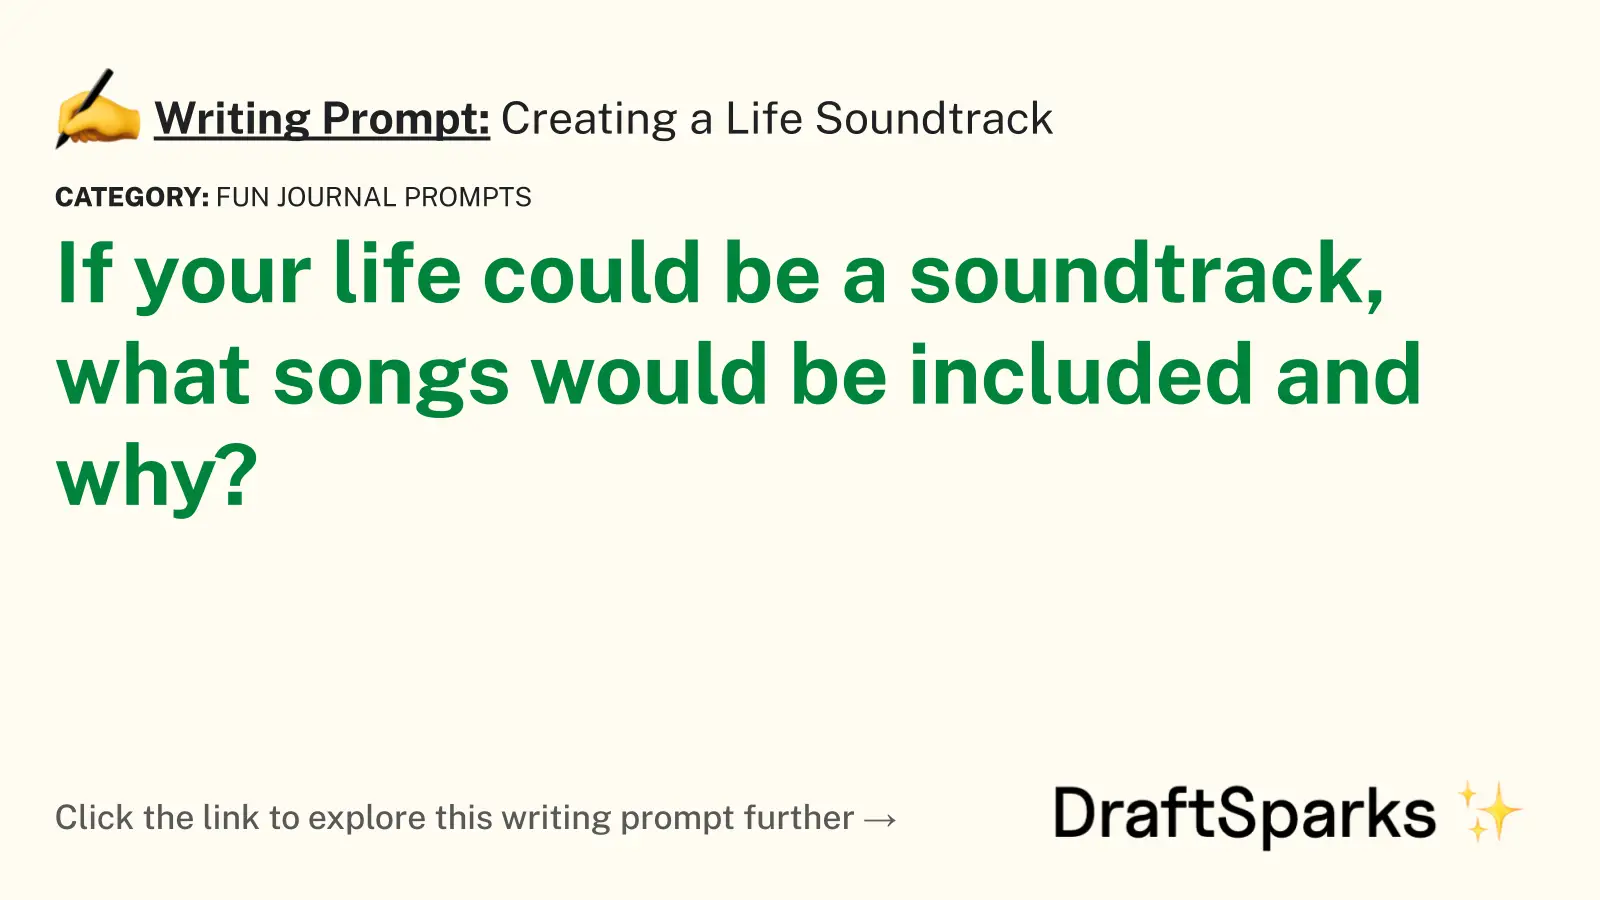 Creating a Life Soundtrack